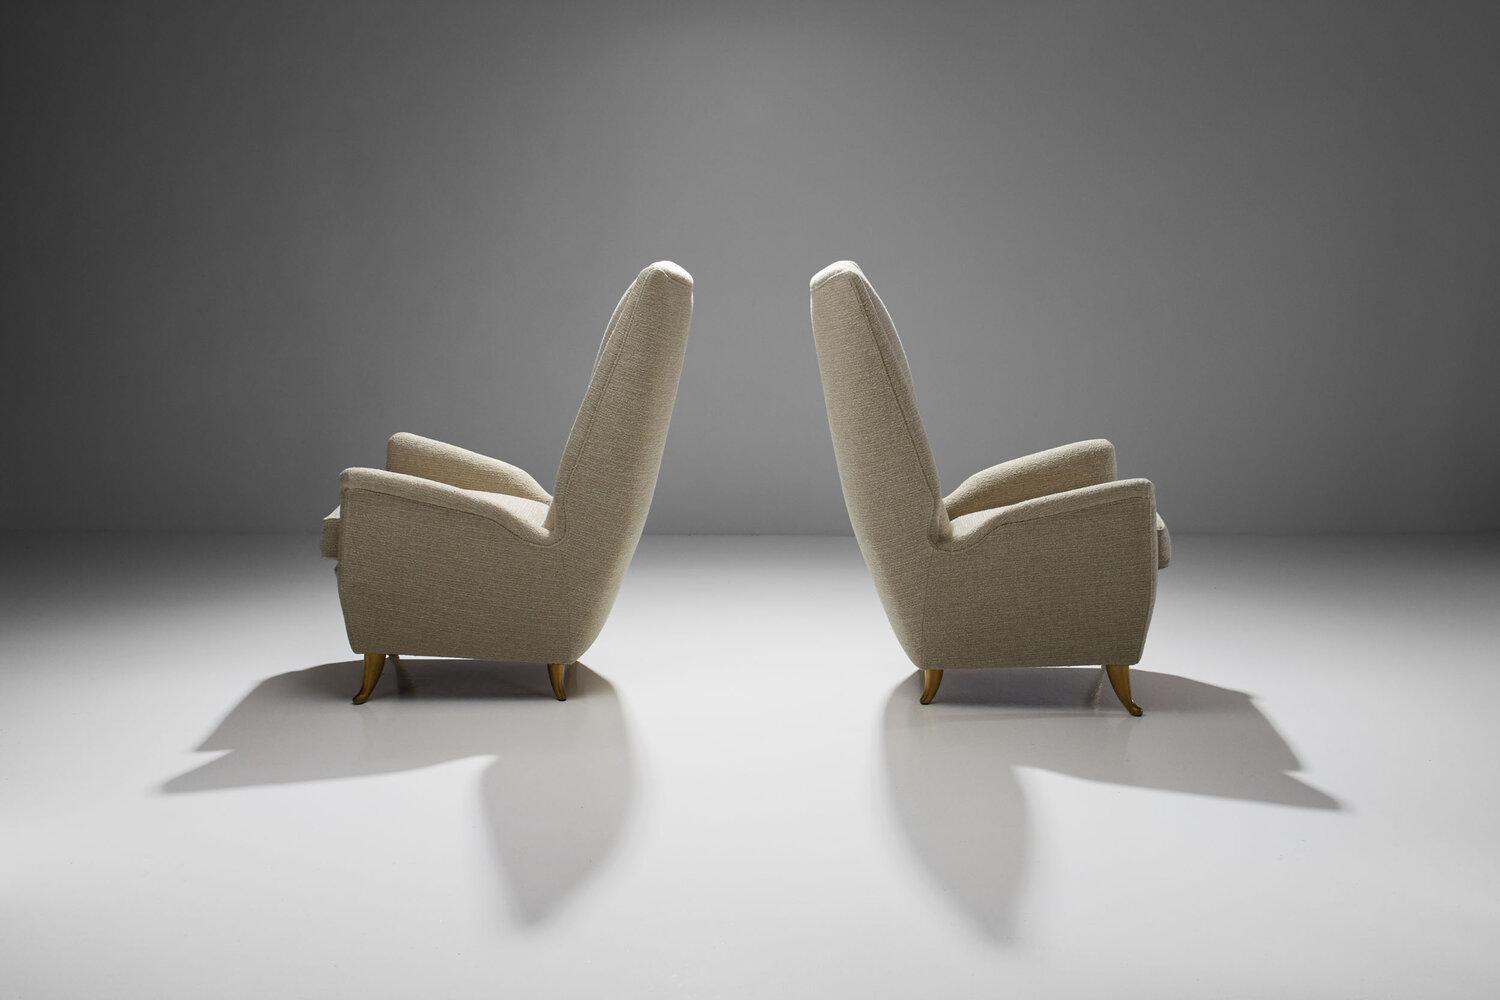 Italian Pair of Lounge Chairs Attributed to Gio Ponti for ISA Bergamo, Italy, 1950s